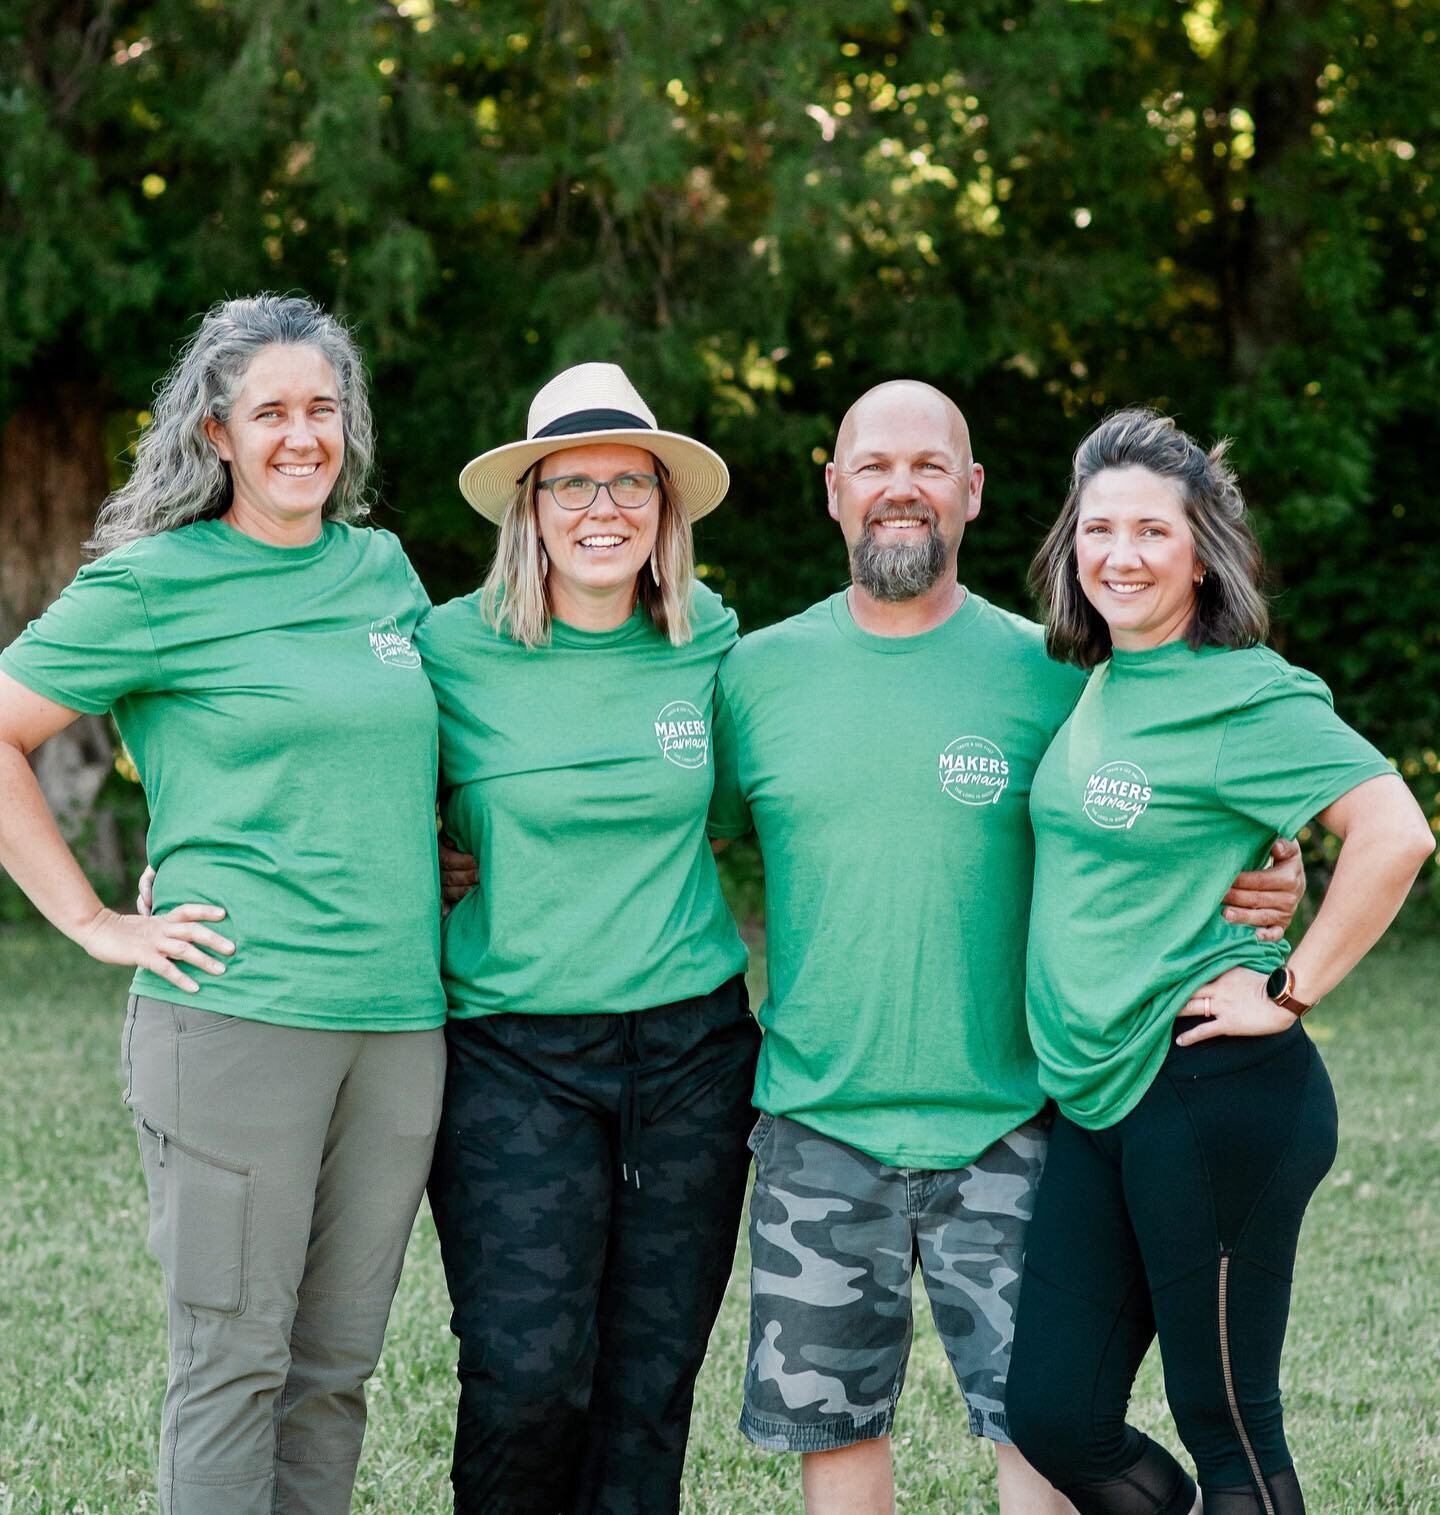 Do you have a team of people that will rally around an idea that God puts on your heart?

These are the founding members of the Makers Farmacy board. Together (along with spouses &amp; kids!) they have birthed this mission to feed needy people health